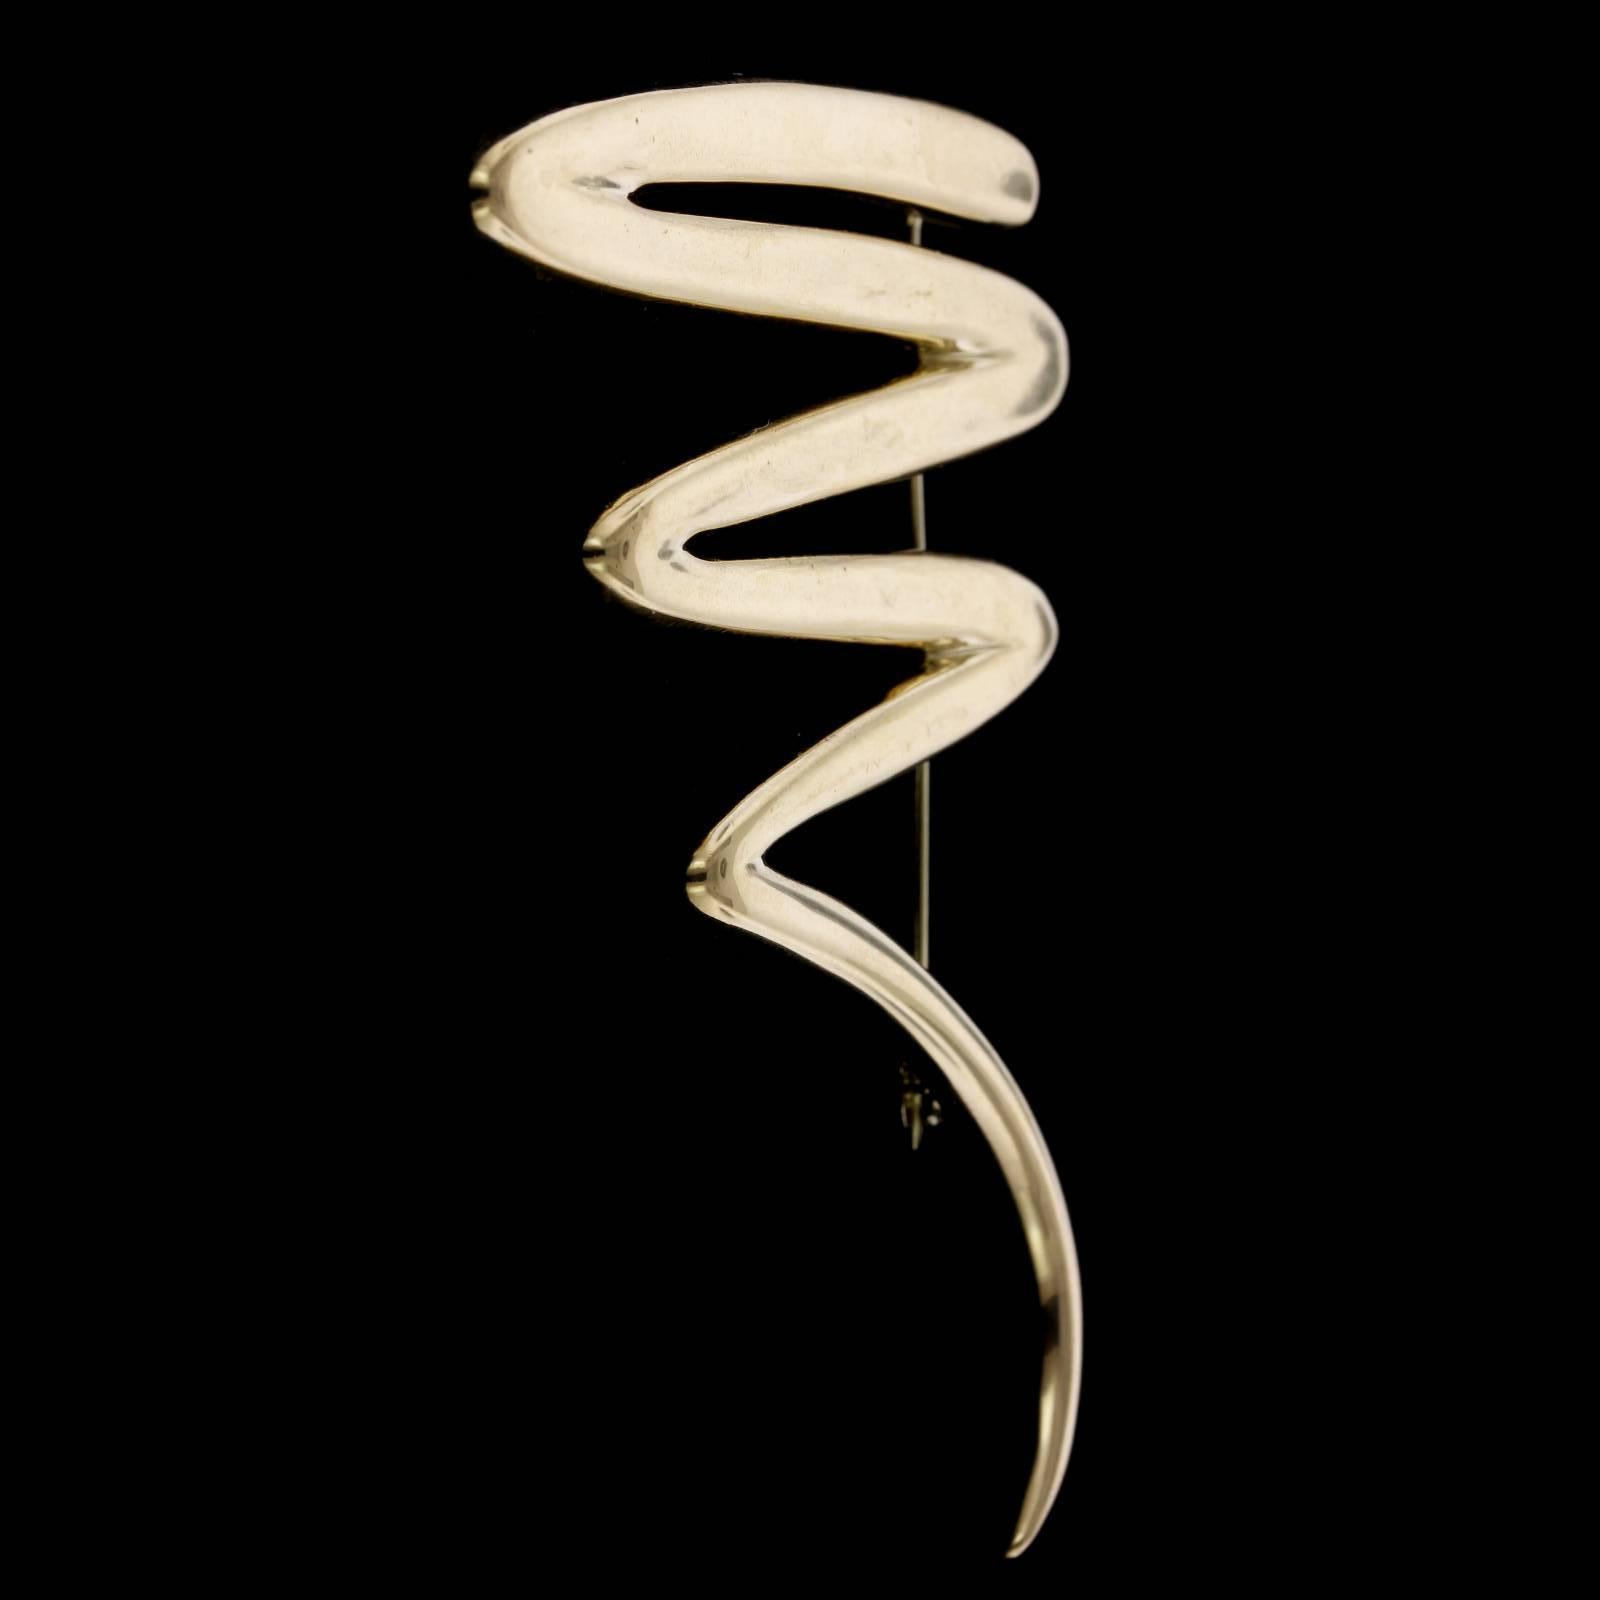 Tiffany & Co. Paloma Picasso 18K Yellow Gold Squiggle Pin. Length 2 5/8